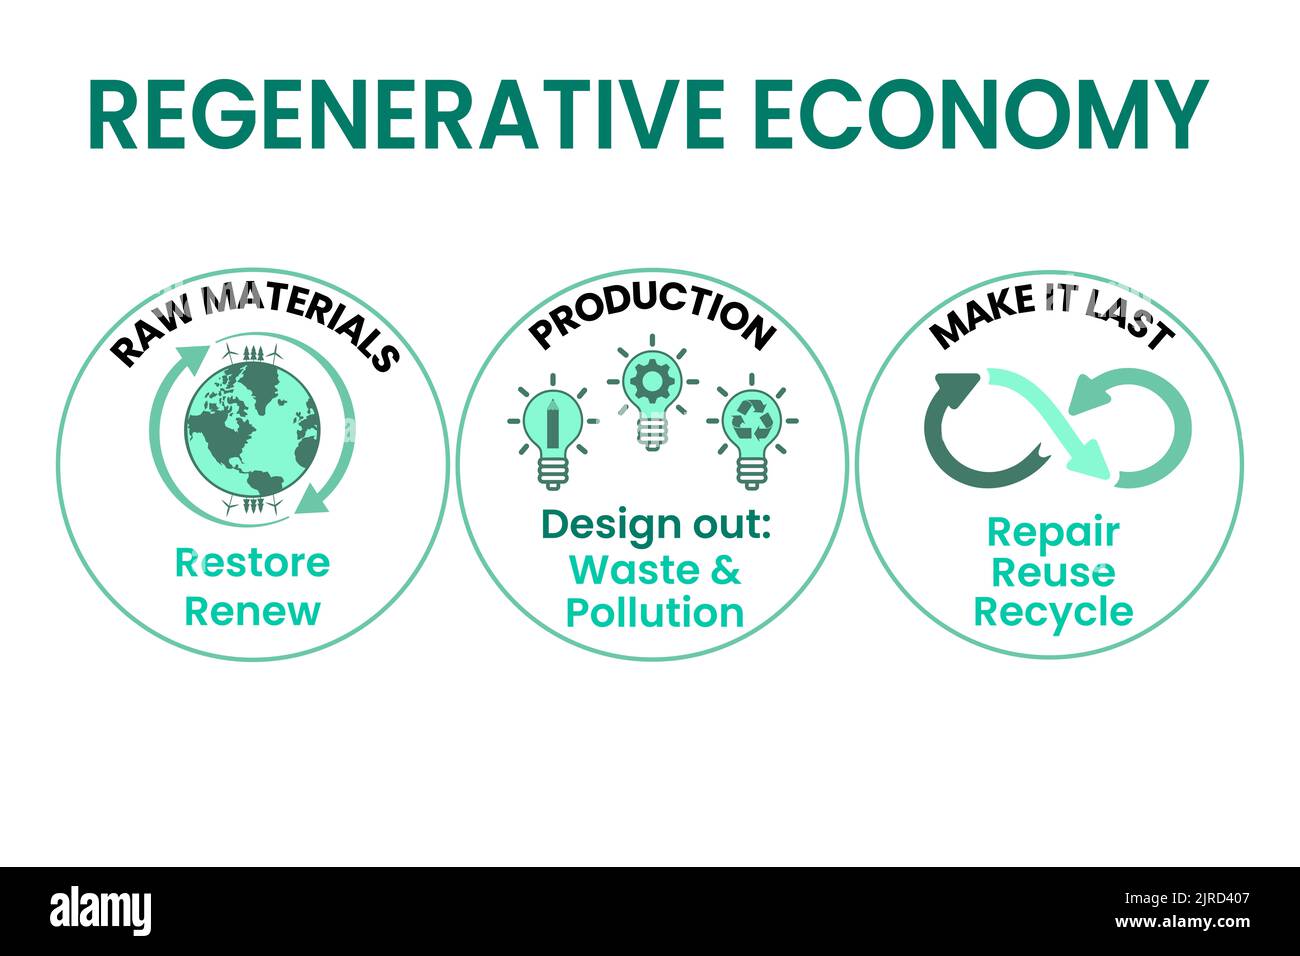 Regenerative Economy illustrated, regenerative sustainable economy renewable resources, design out waste, reuse, repair, recycle make it last for sust Stock Photo